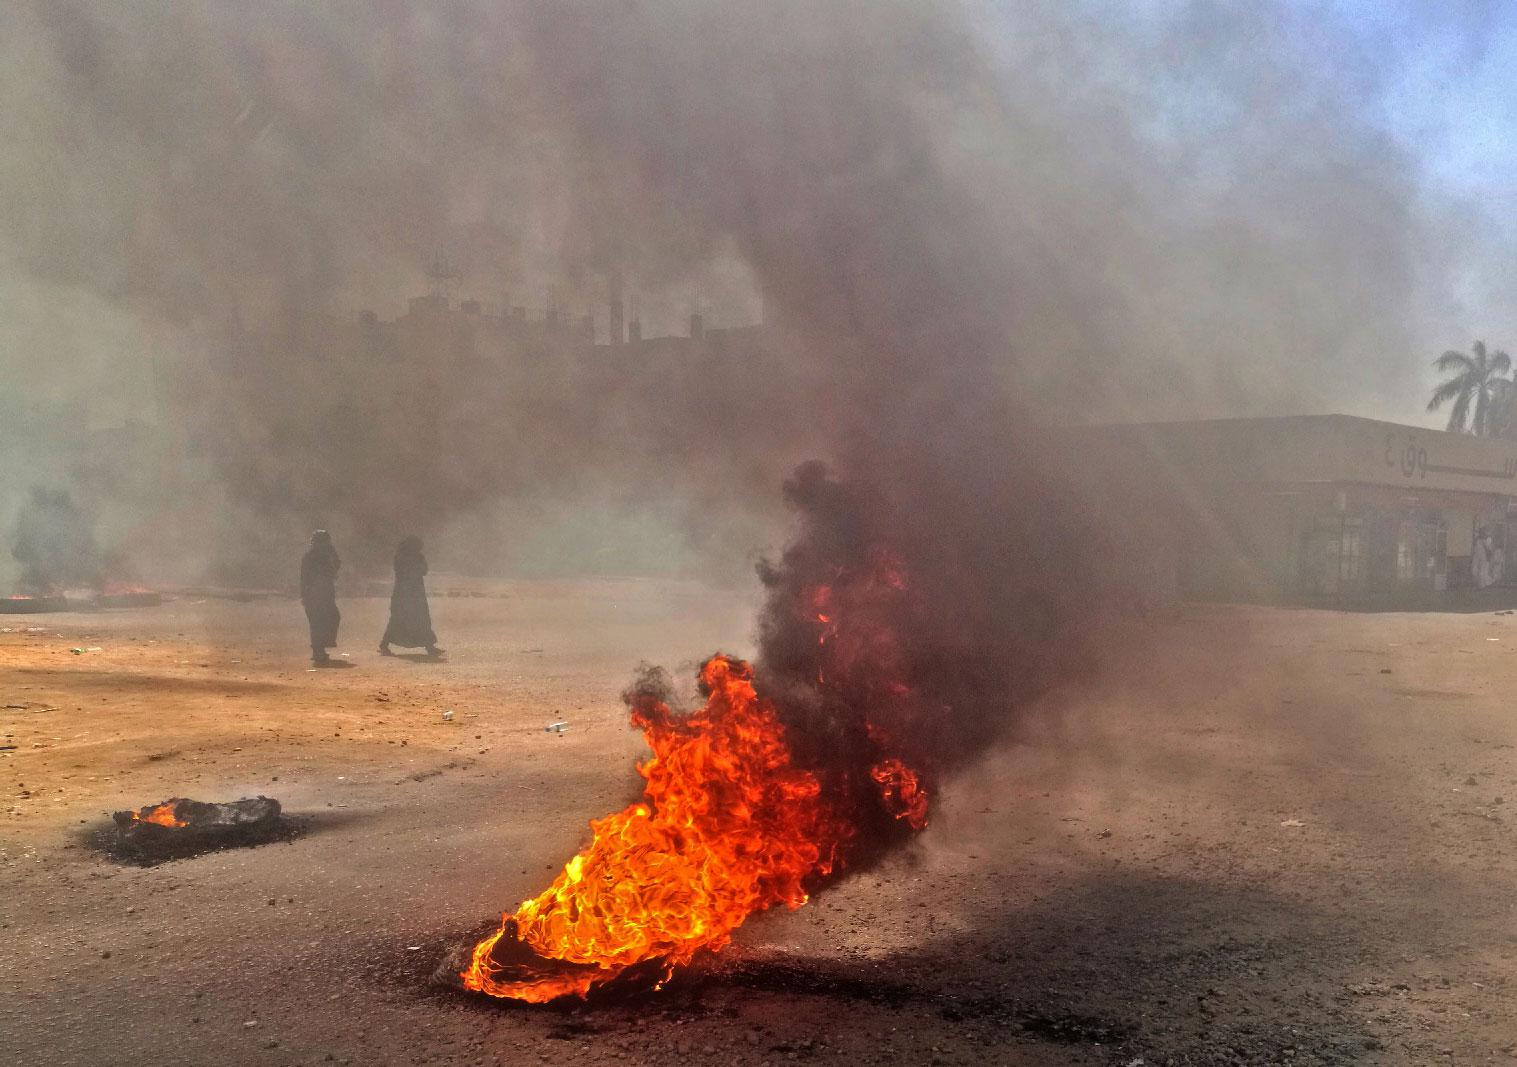 Sudanese protestors burn tires during an anti-government demonstration on January 18, 2019 in the capital Khartoum.